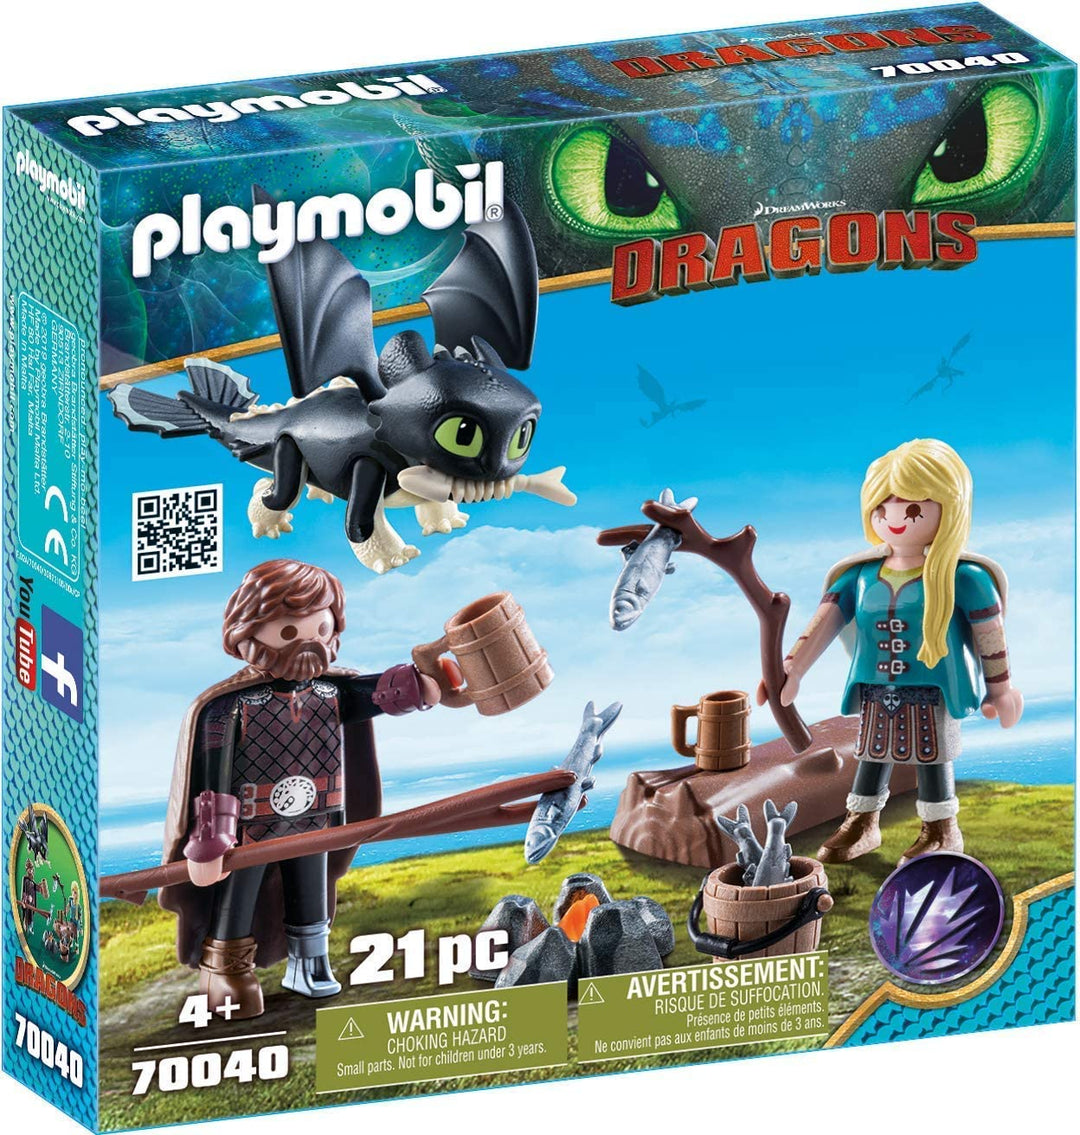 Playmobil 70040 DreamWorks Dragons, Hiccup and Astrid with Baby Dragon